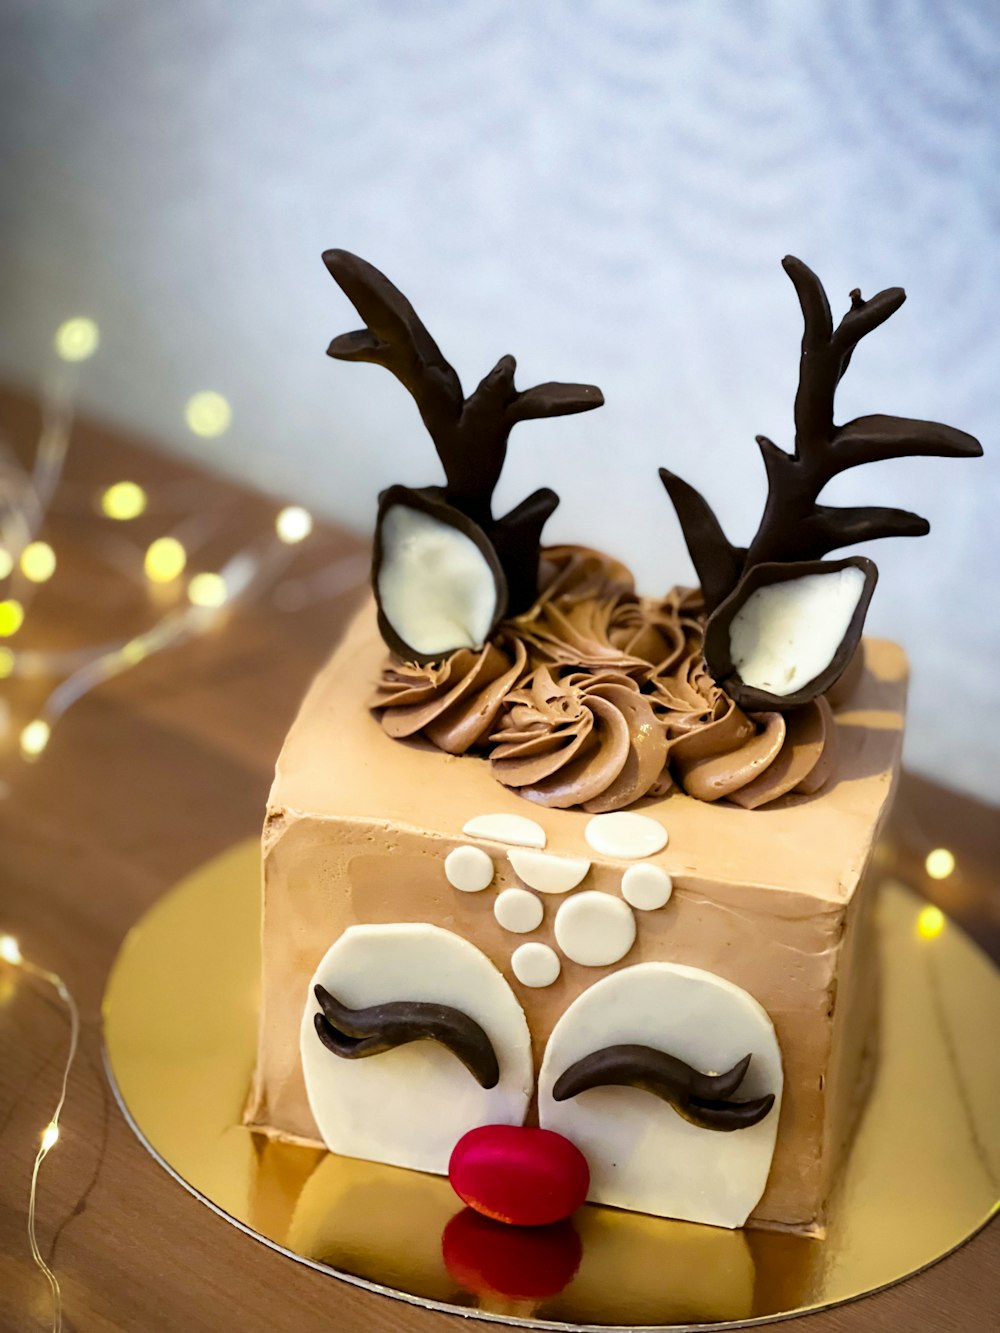 a cake decorated with chocolate icing and decorated with reindeer noses